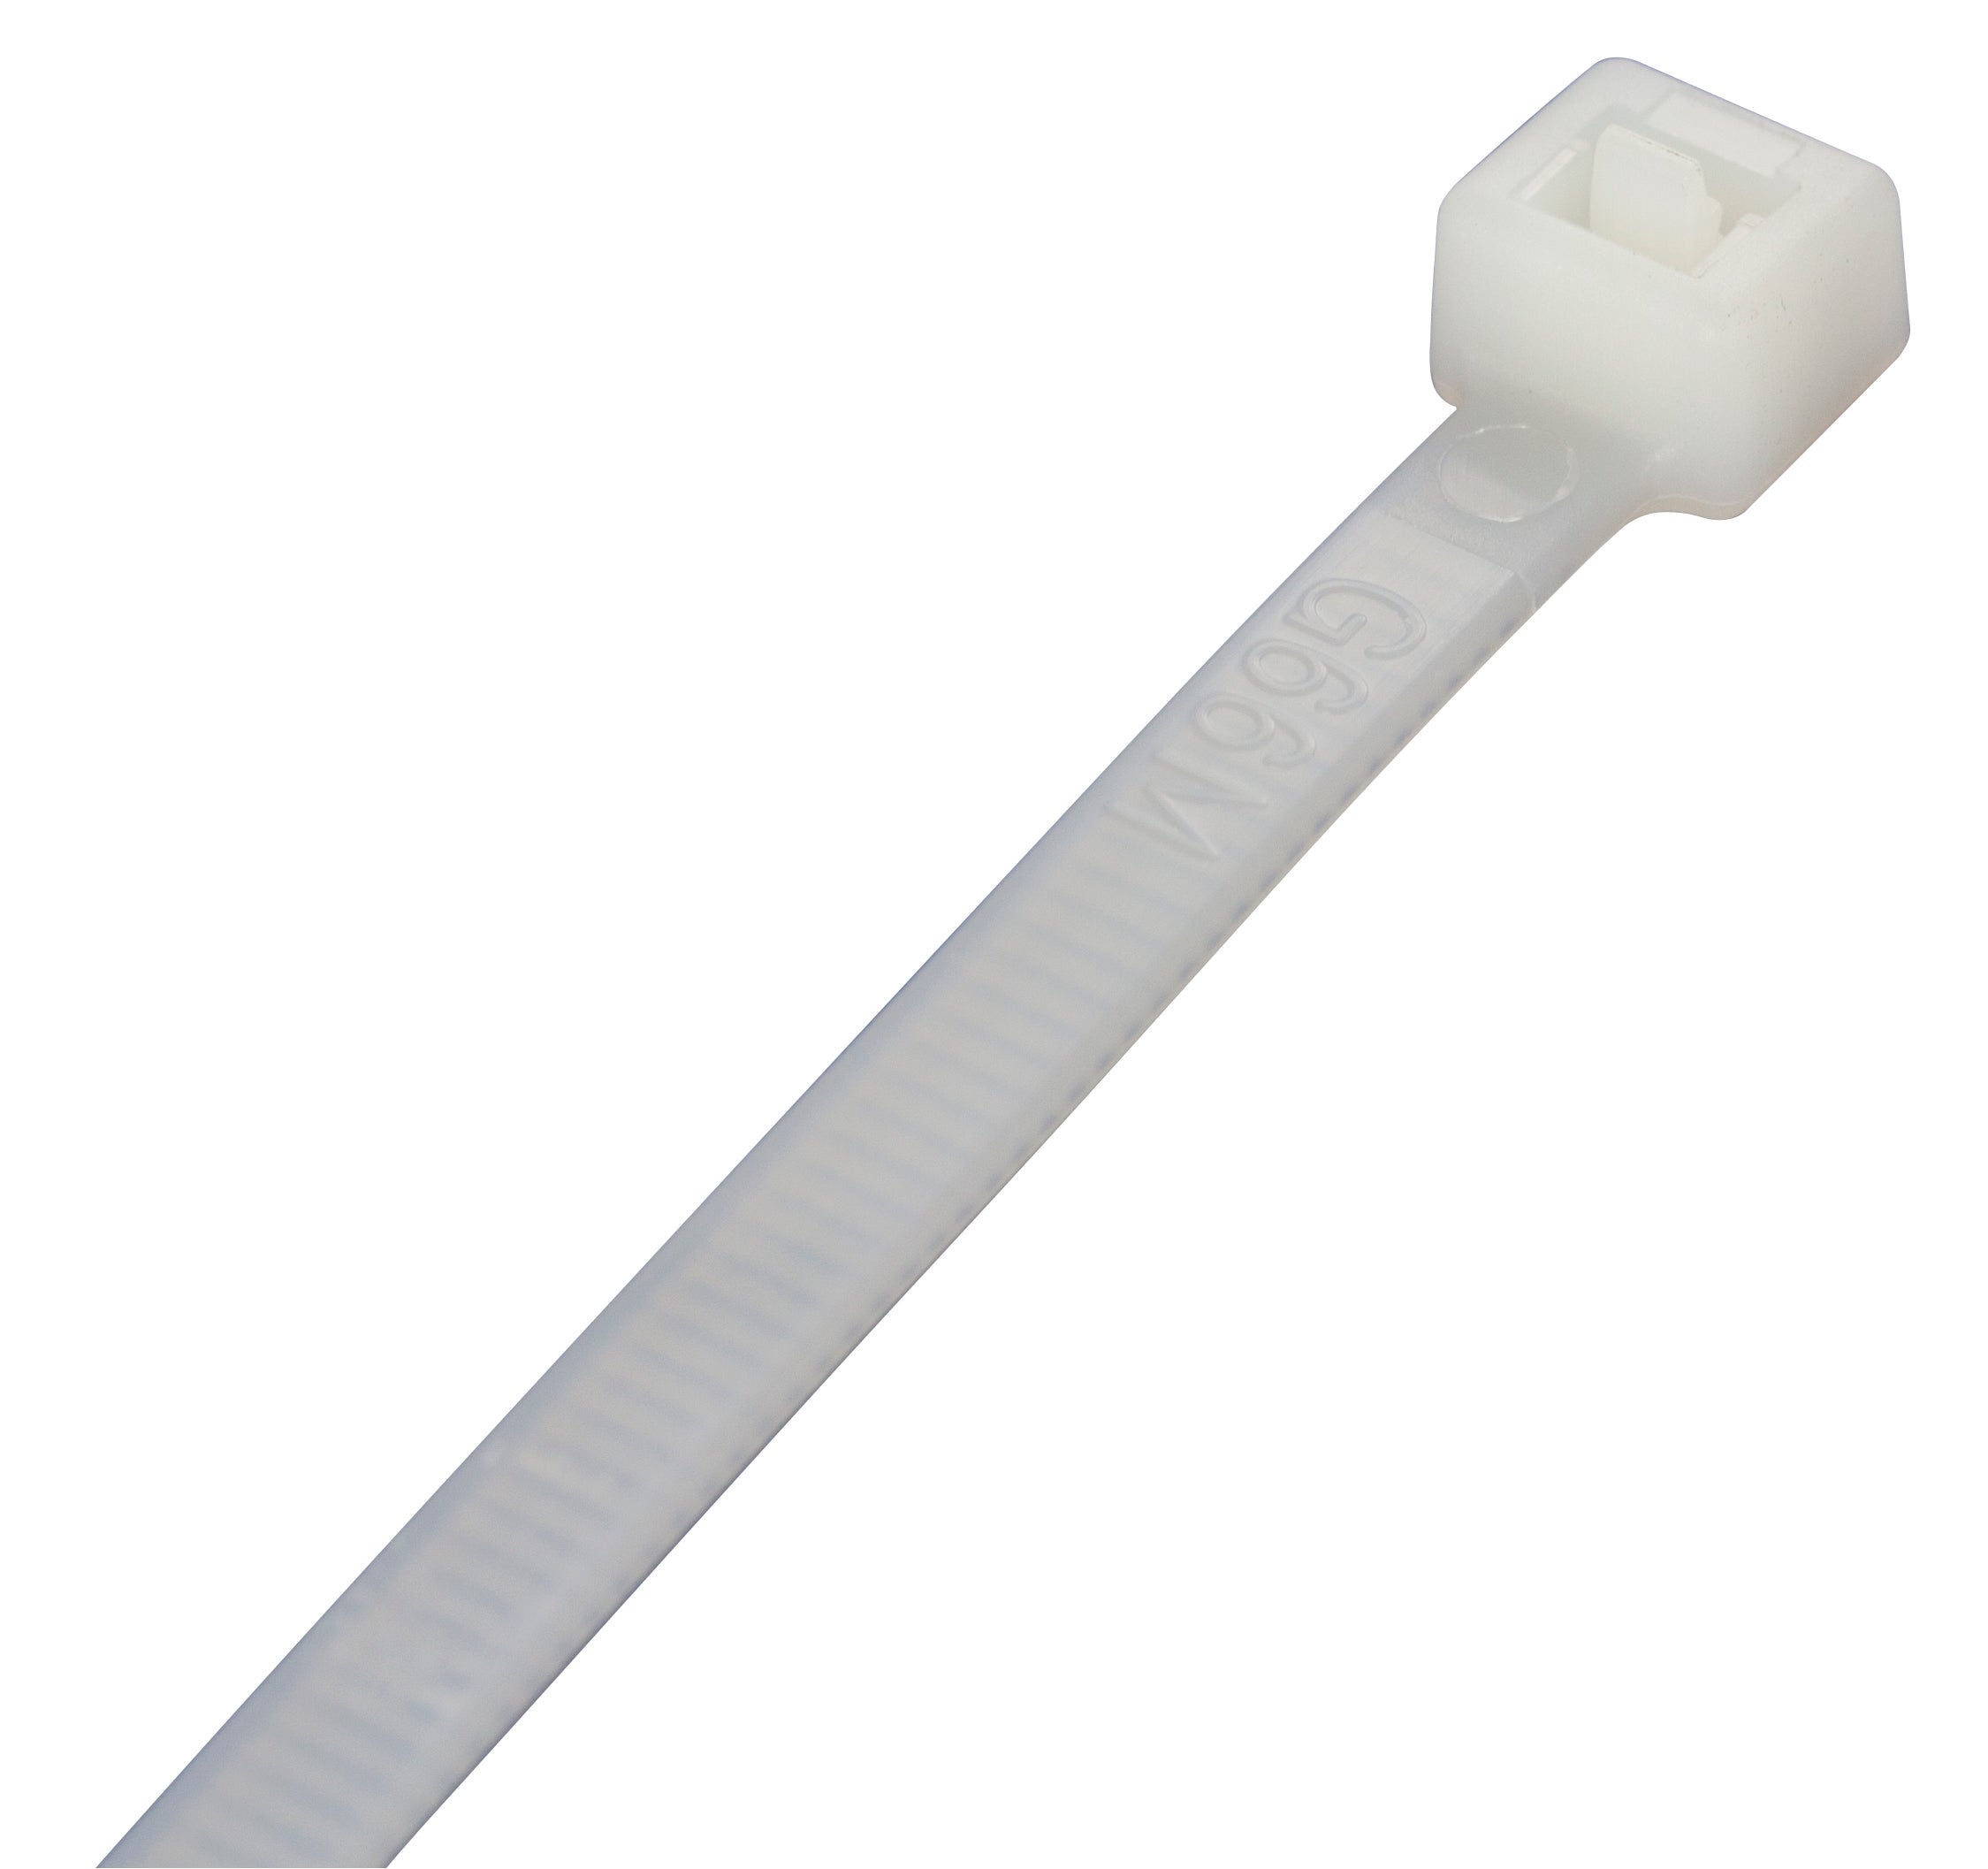 Premium Natural Cable Ties 120mm x 4.8mm - Pack of 100